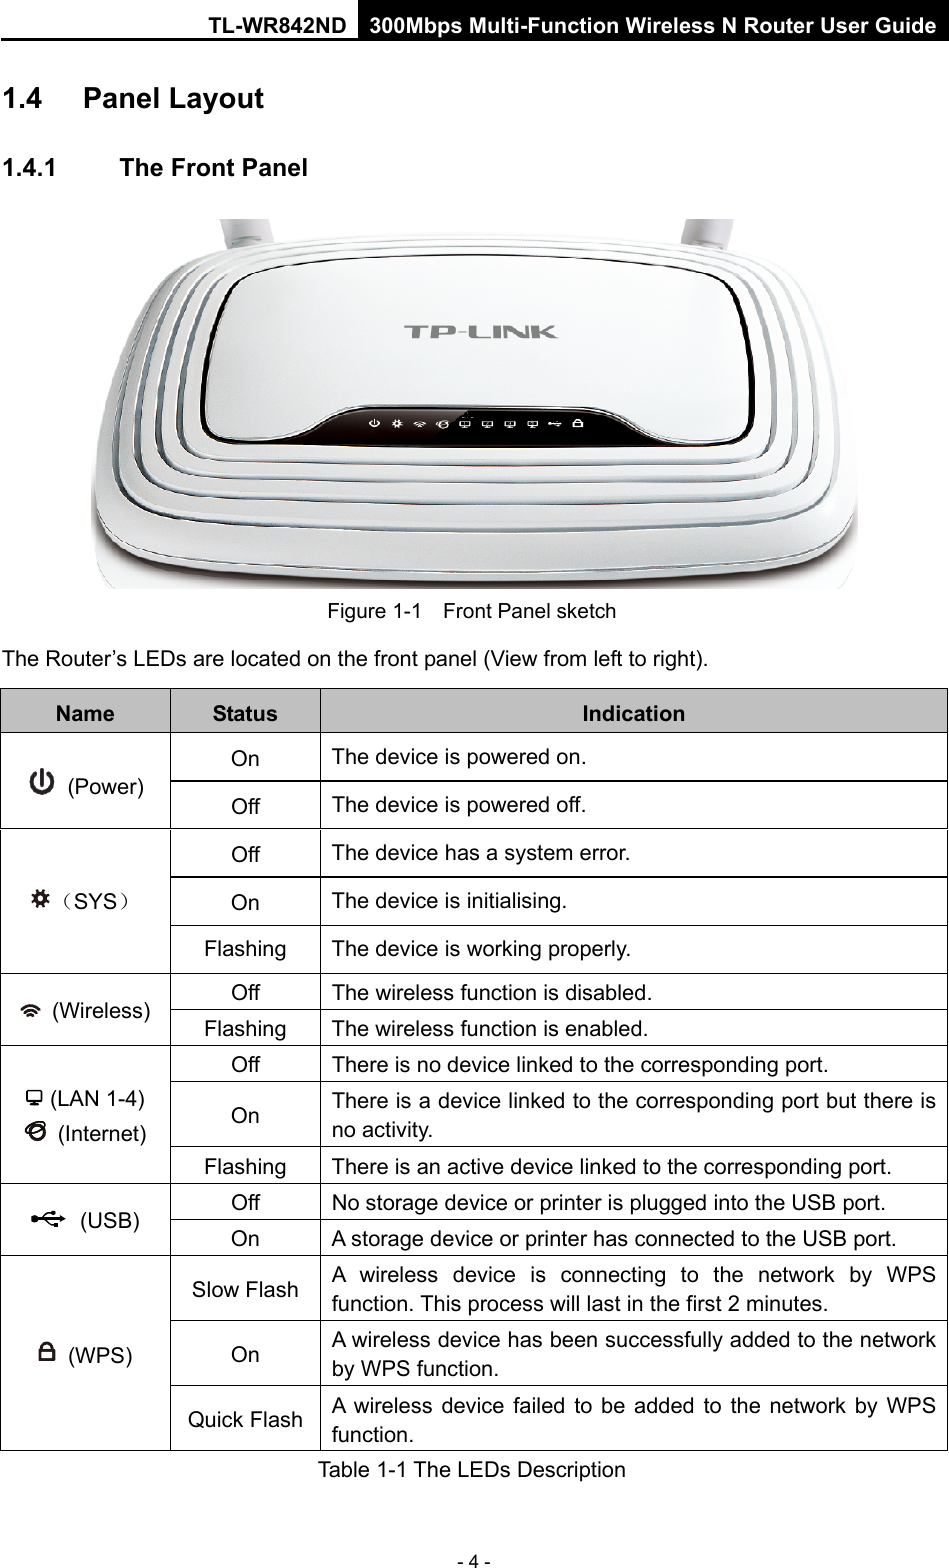 TL-WR842ND 300Mbps Multi-Function Wireless N Router User Guide  - 4 - 1.4 Panel Layout 1.4.1 The Front Panel  Figure 1-1    Front Panel sketch The Router’s LEDs are located on the front panel (View from left to right).   Name Status Indication  (Power) On The device is powered on. Off The device is powered off. （SYS） Off The device has a system error. On The device is initialising. Flashing The device is working properly.  (Wireless) Off The wireless function is disabled. Flashing The wireless function is enabled.    (LAN 1-4)   (Internet) Off There is no device linked to the corresponding port. On There is a device linked to the corresponding port but there is no activity. Flashing There is an active device linked to the corresponding port.  (USB) Off No storage device or printer is plugged into the USB port. On A storage device or printer has connected to the USB port.     (WPS) Slow Flash A  wireless  device is connecting to the network by WPS function. This process will last in the first 2 minutes. On A wireless device has been successfully added to the network by WPS function.   Quick Flash A wireless device failed to be added to the network by WPS function. Table 1-1 The LEDs Description 